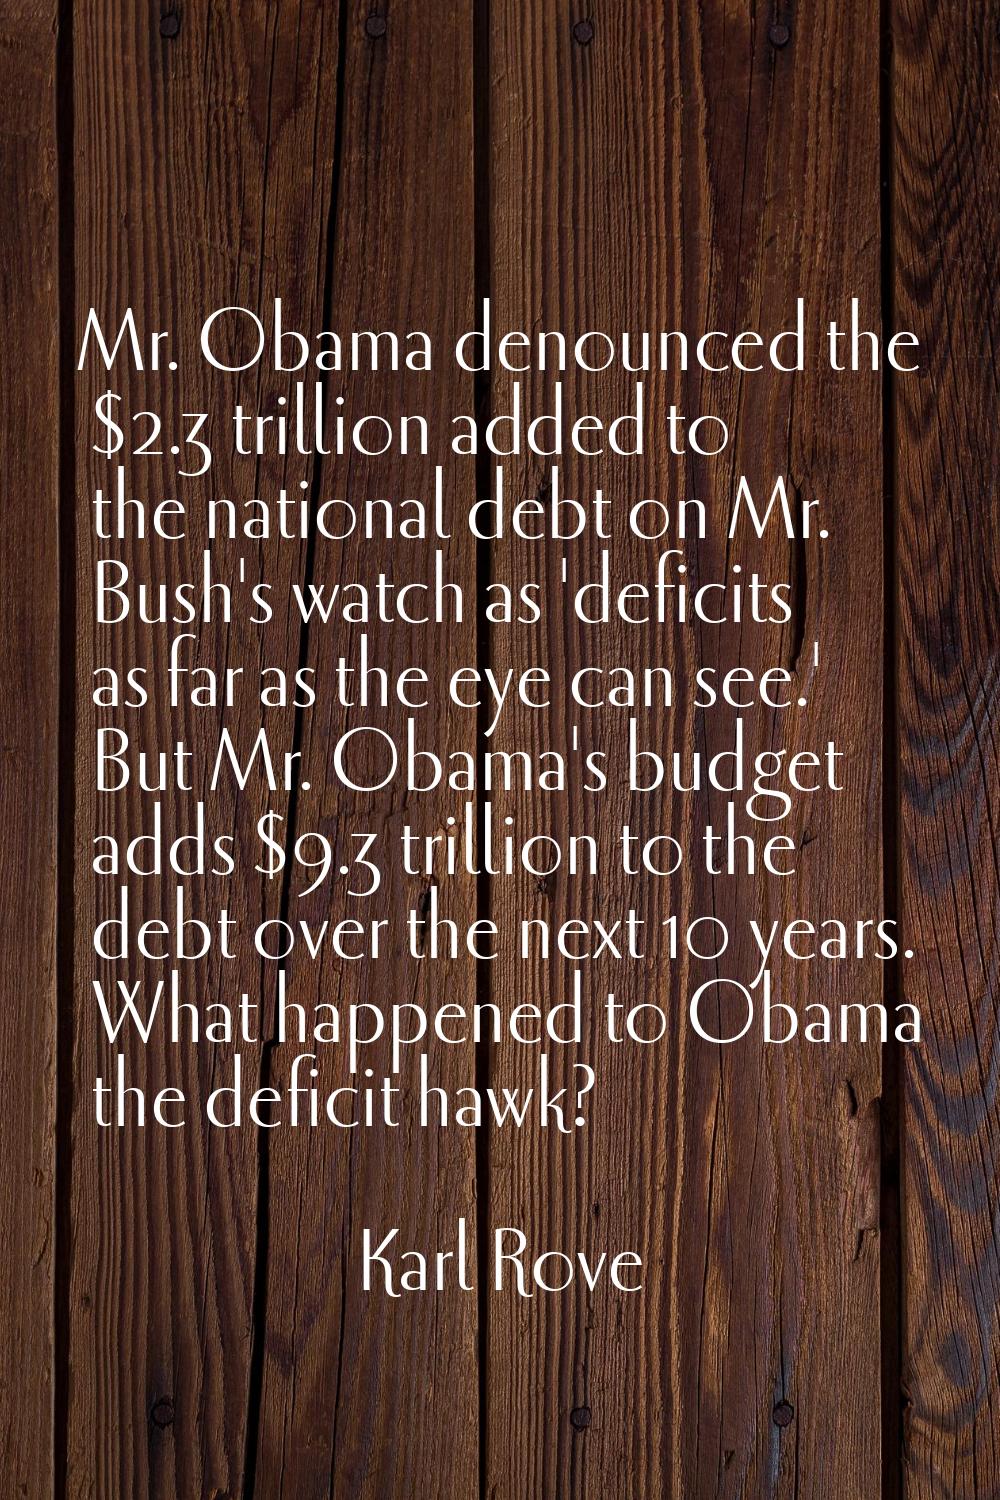 Mr. Obama denounced the $2.3 trillion added to the national debt on Mr. Bush's watch as 'deficits a